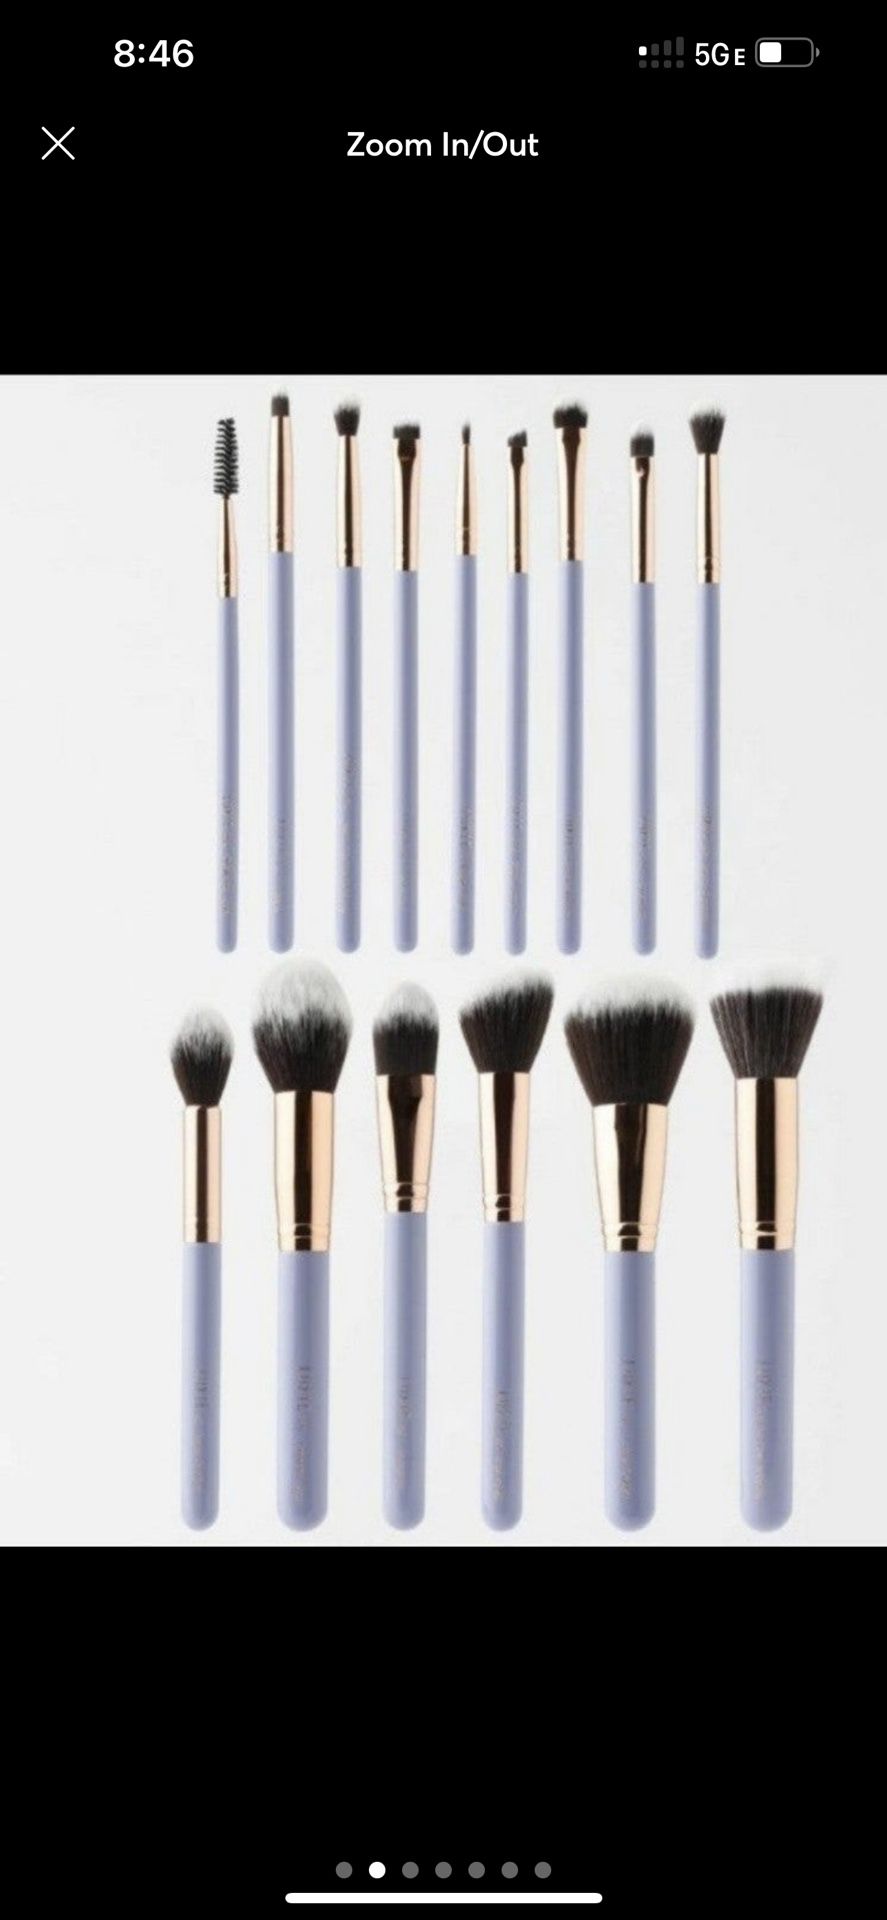 Luxie Dreamcatcher Brush Set *** PRICE IS FIRM *** New 15 brushes RV $175 100% authentic